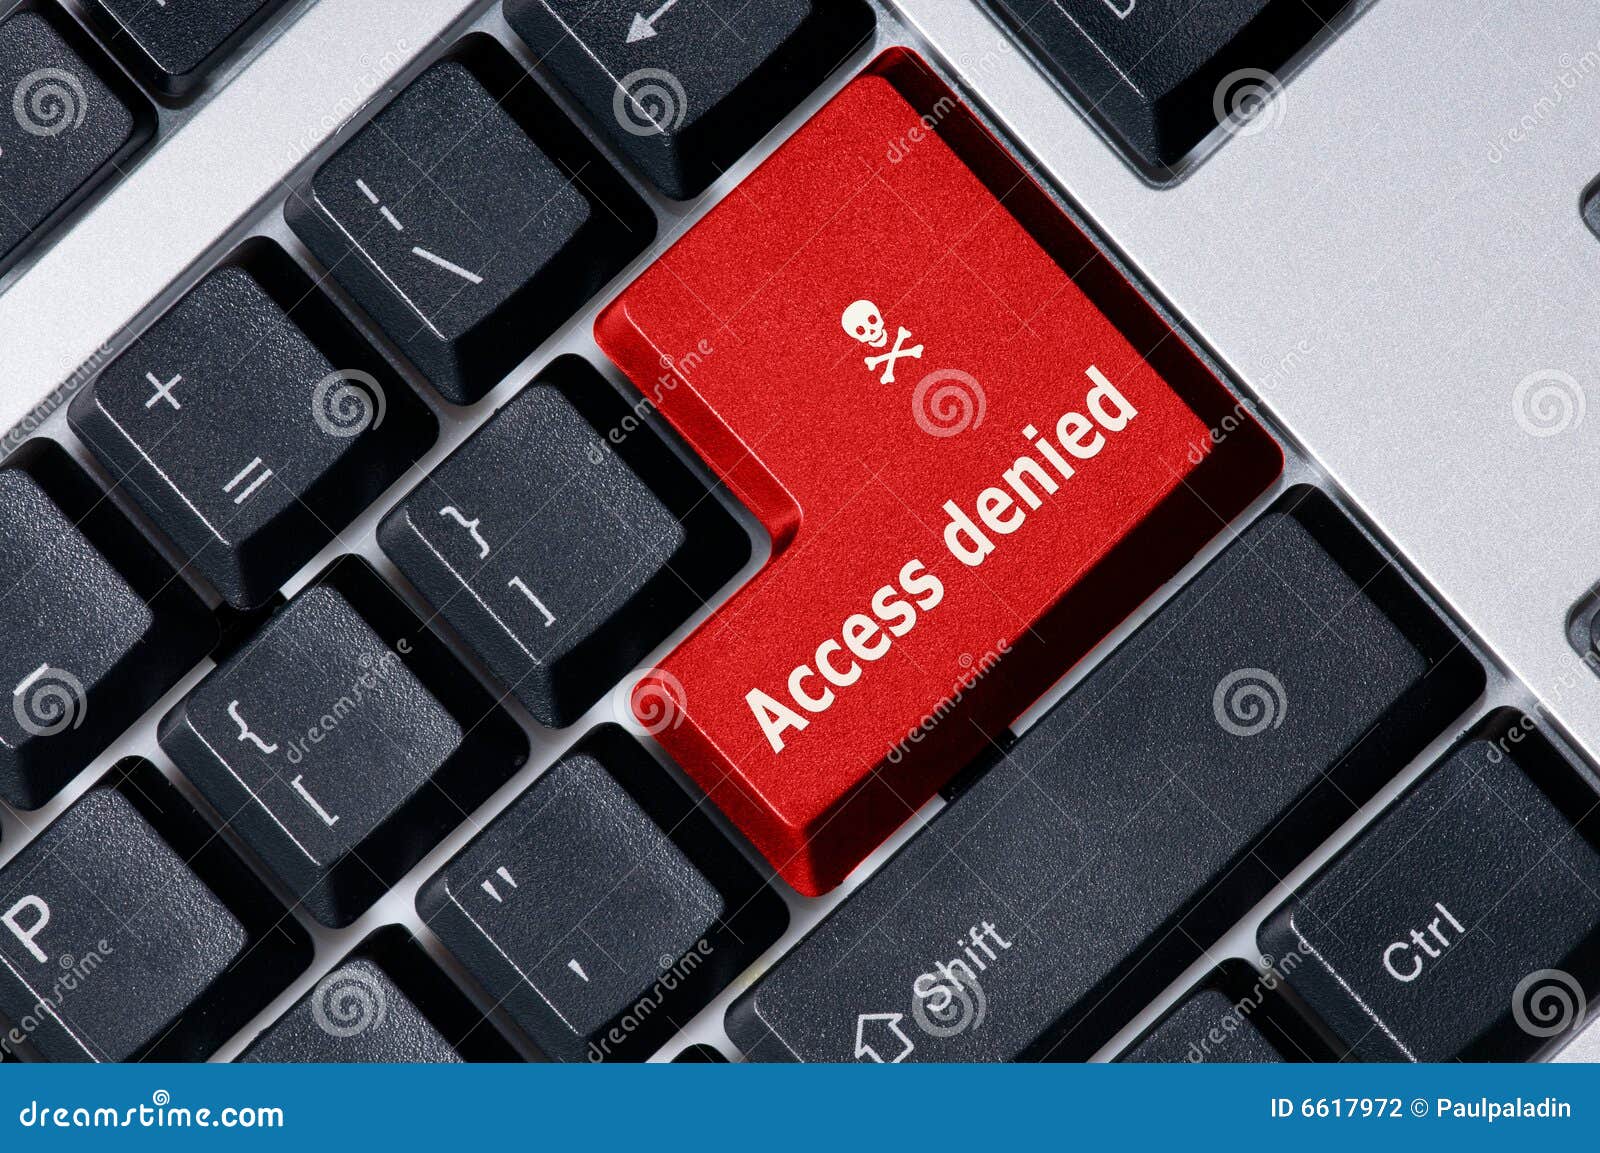 keyboard with red key access denied